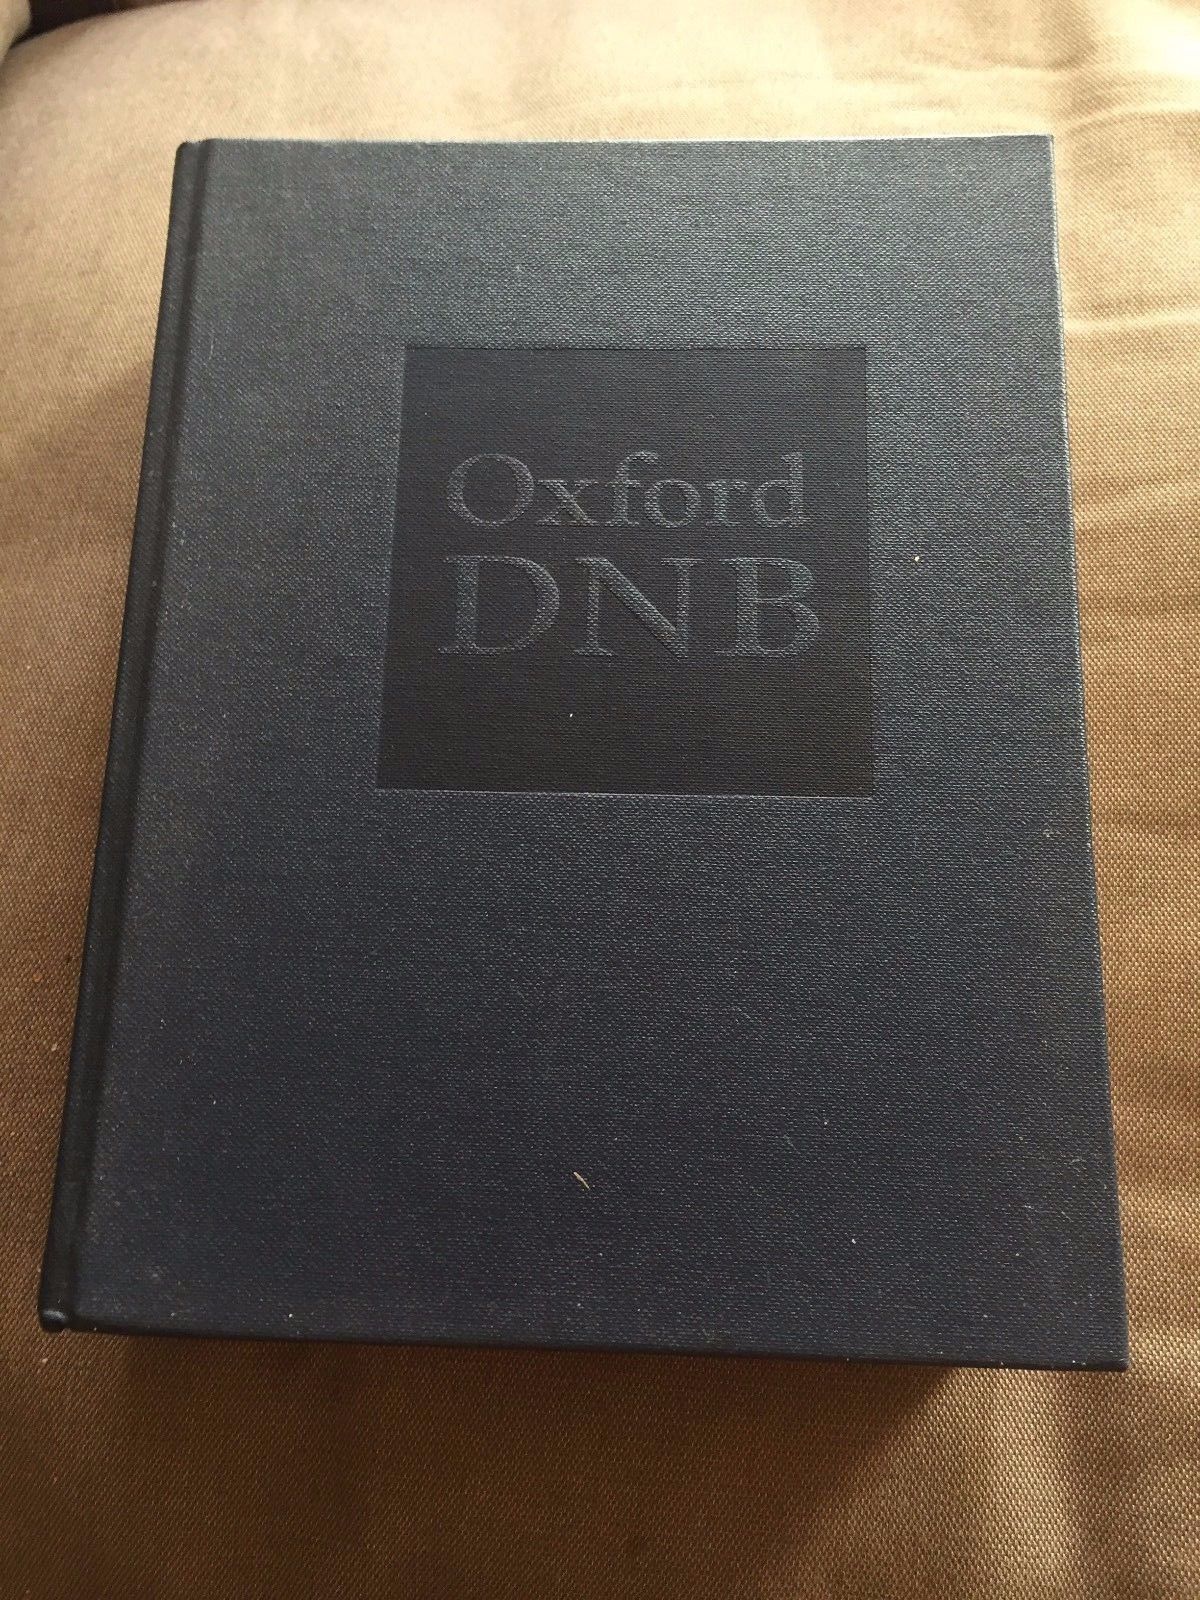 what is the oxford dictionary of national biography